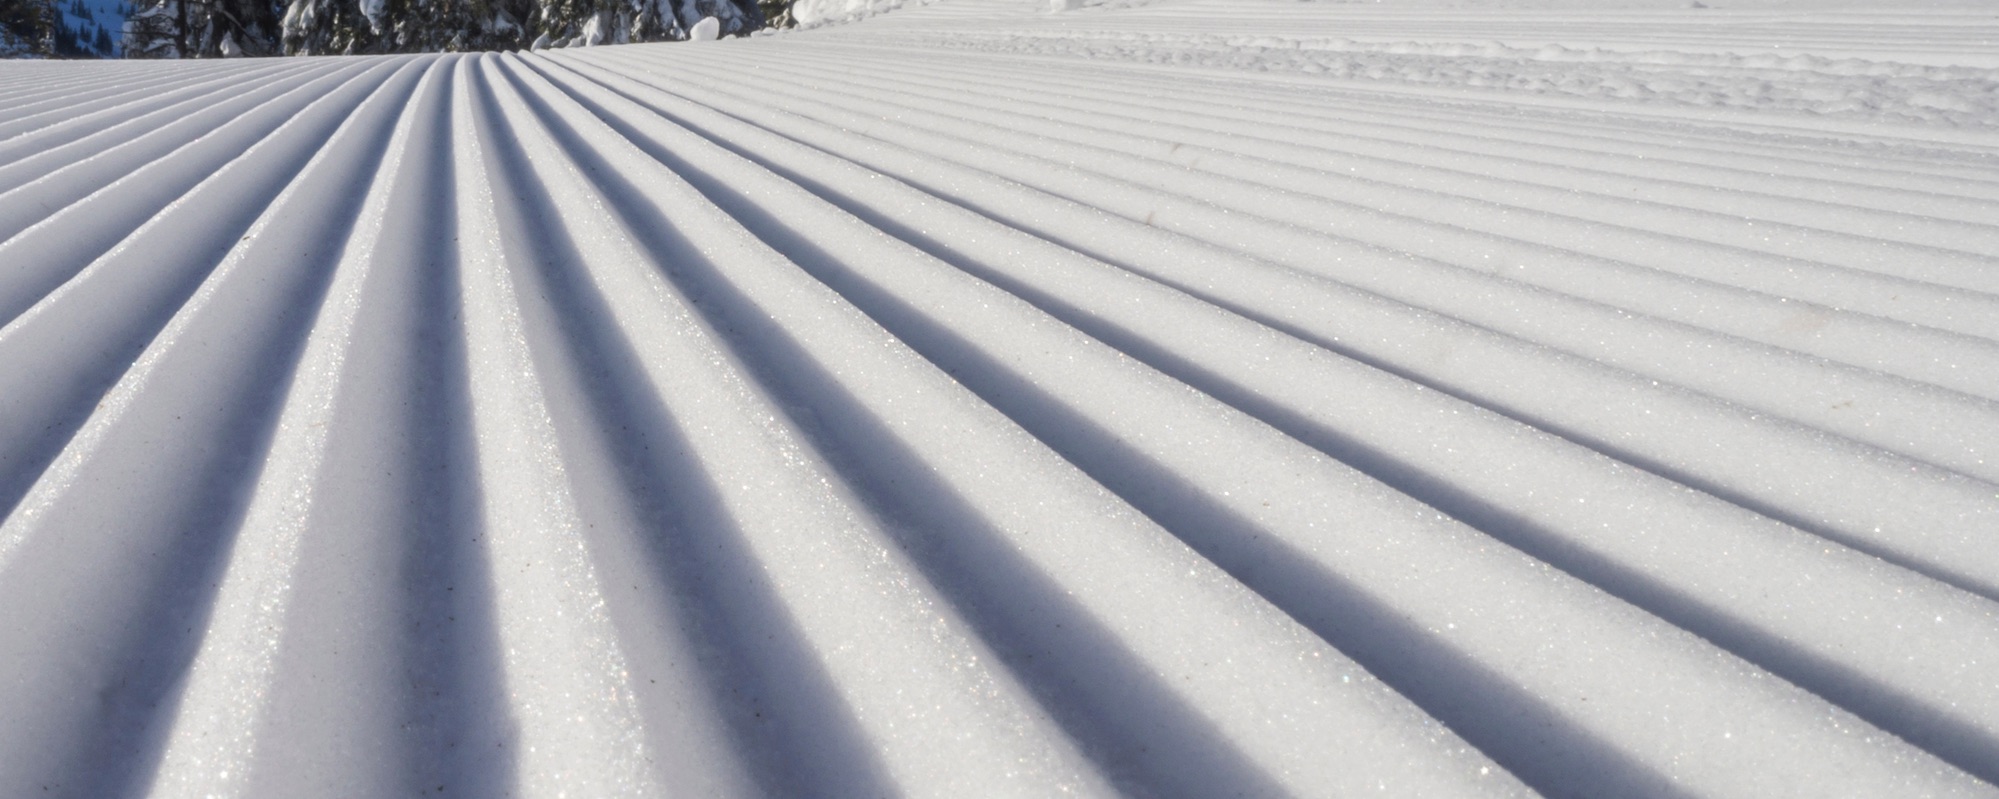 Experience the pristine beauty of freshly groomed snow in this captivating up-close image.